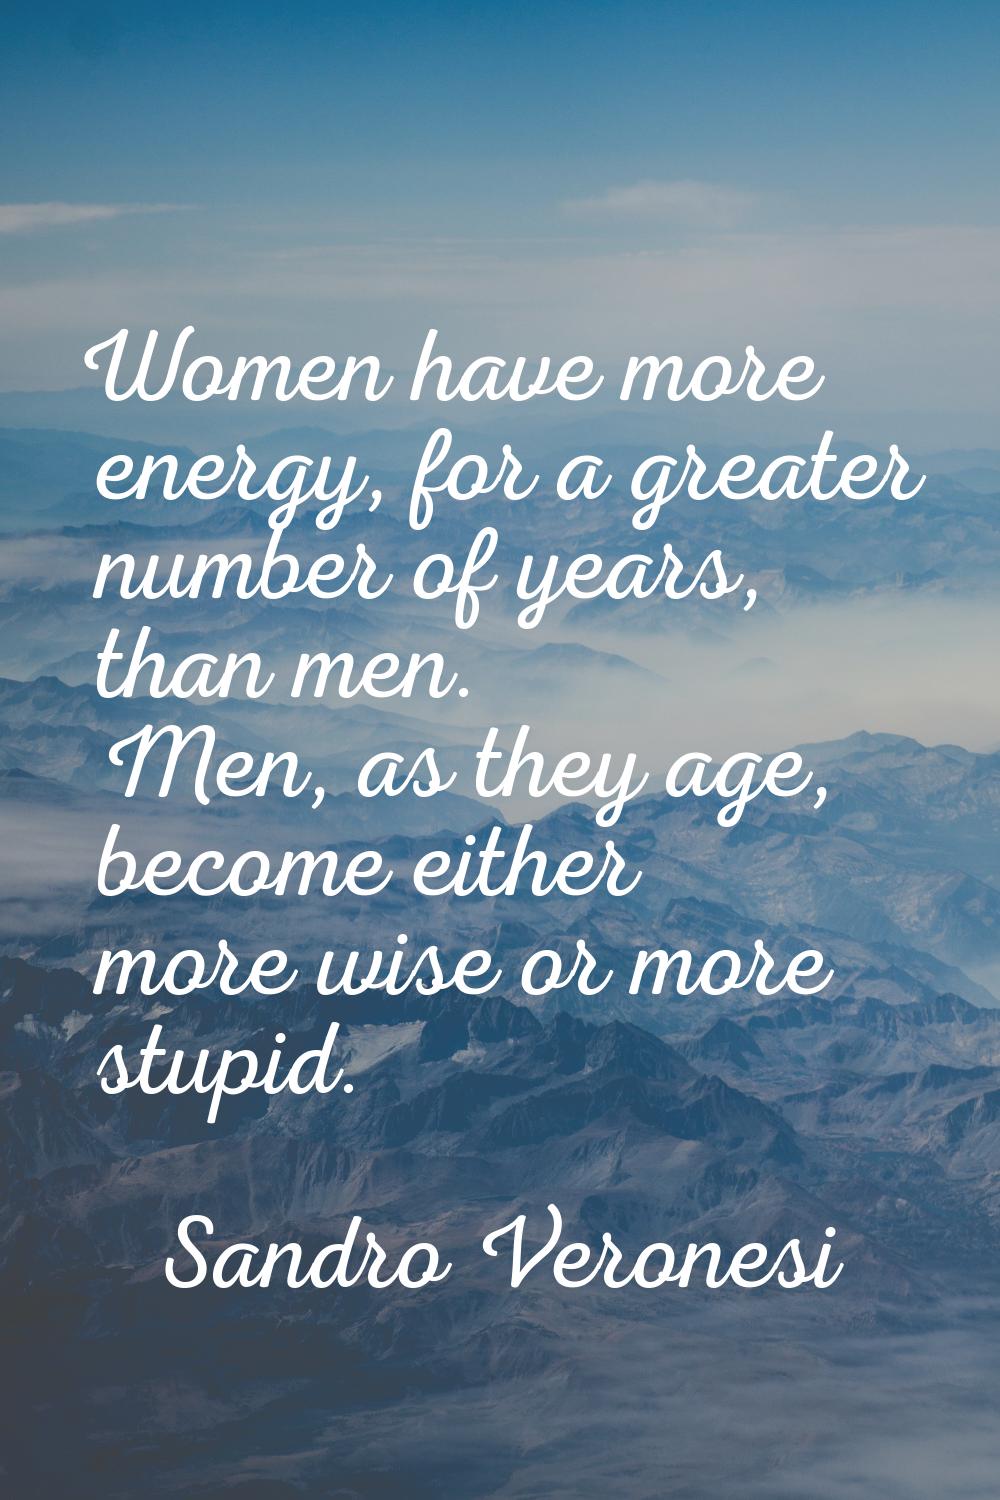 Women have more energy, for a greater number of years, than men. Men, as they age, become either mo